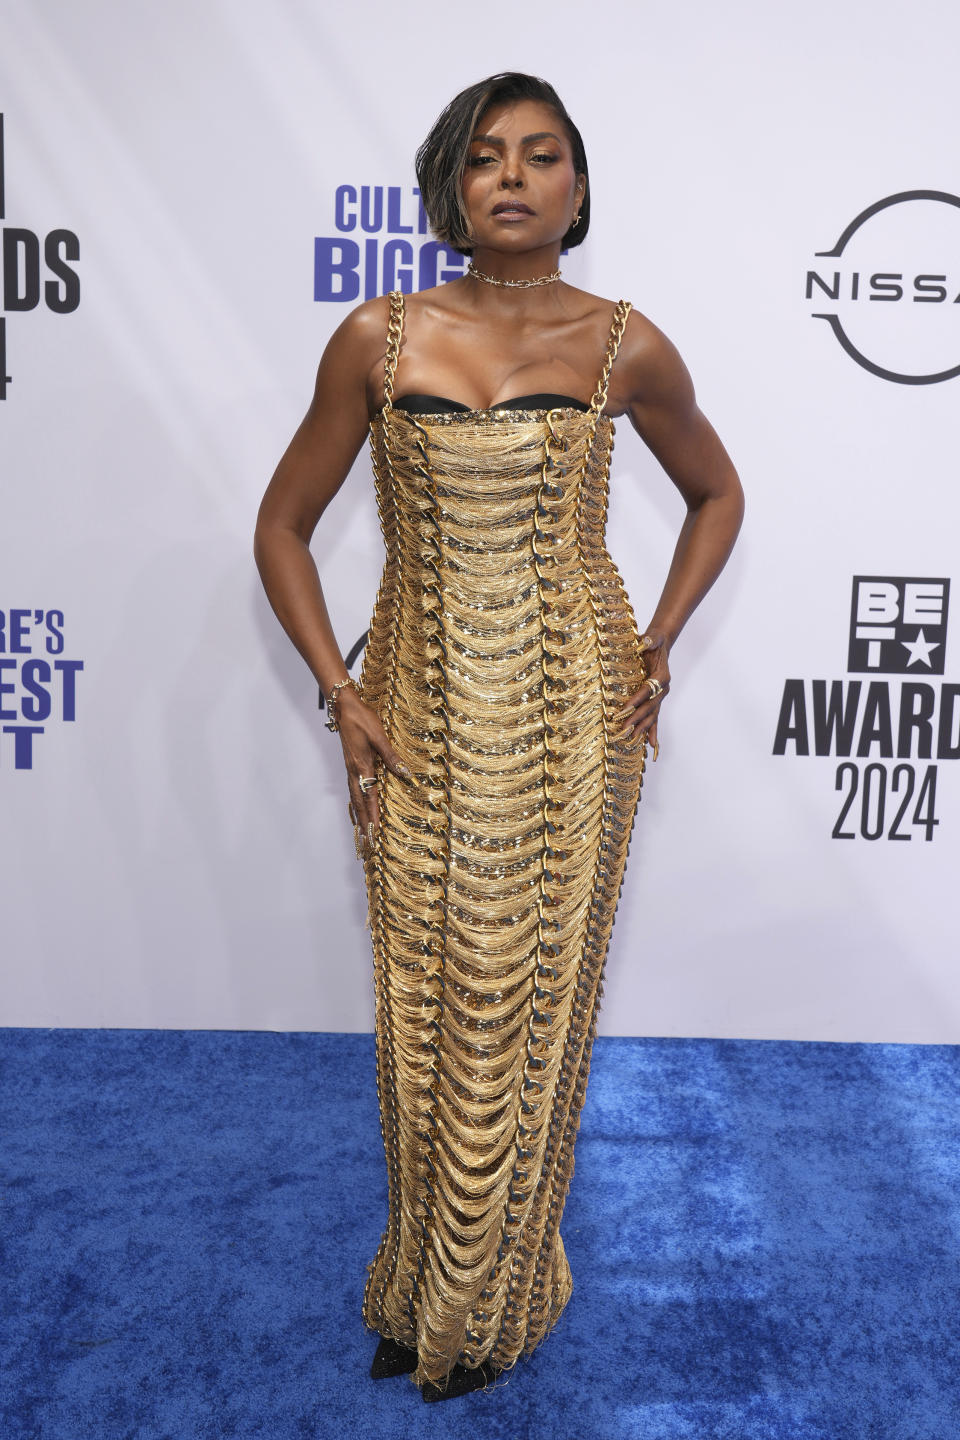 Taraji P. Henson wore an all-gold Balmain dress to arrive at the BET Awards on June 30 at the Peacock Theater in Los Angeles. (Photo by Jordan Strauss/Invision/AP)